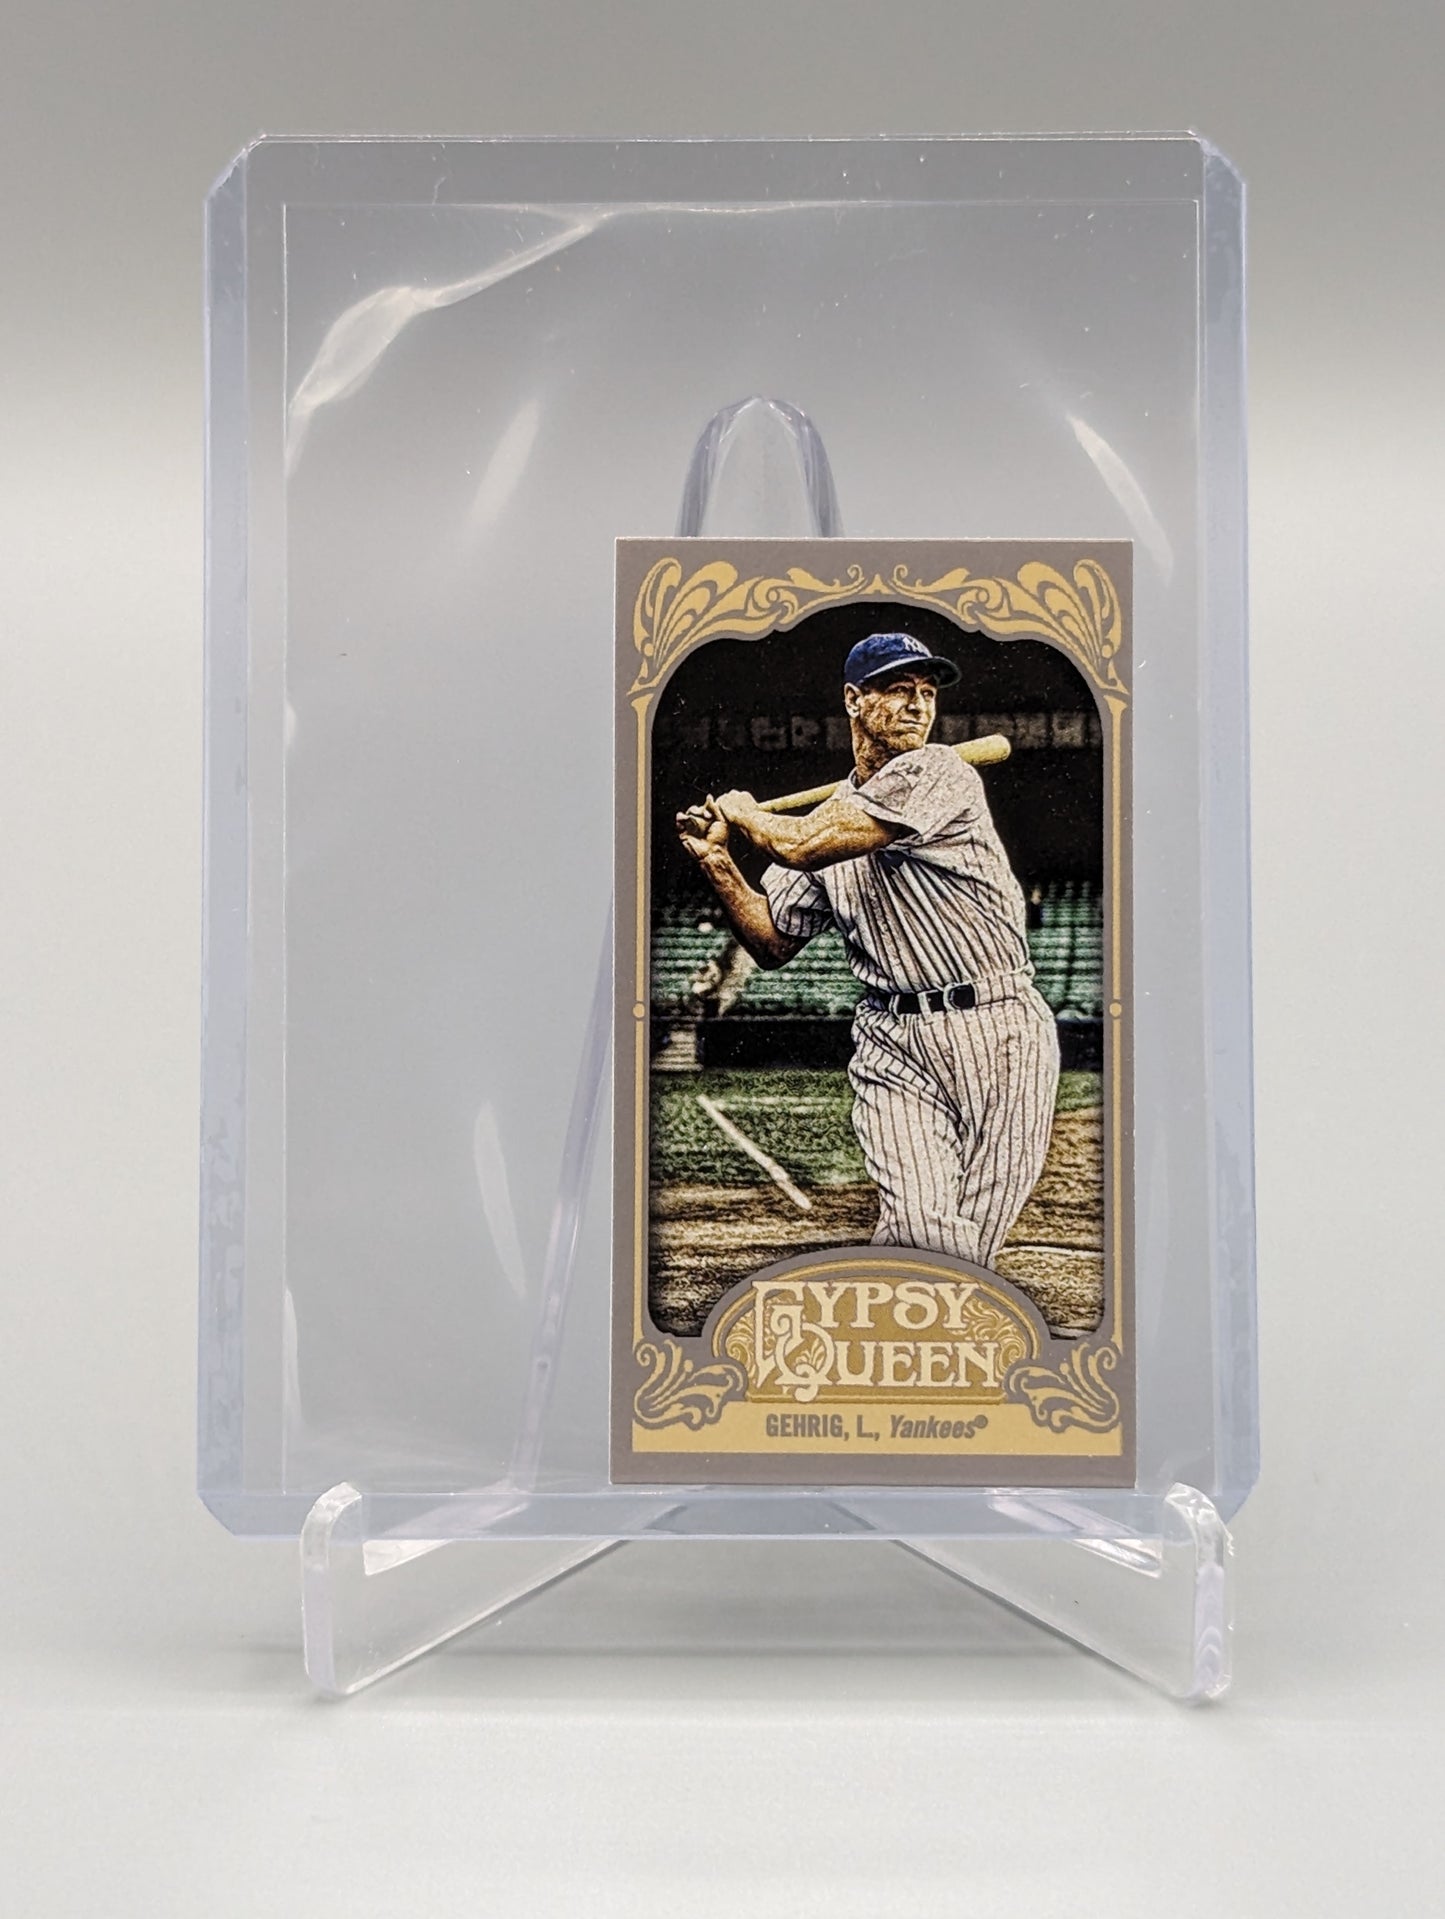 2012 Topps Gypsy Queen Mini Image Variation SP #236 Lou Gehrig Yankees